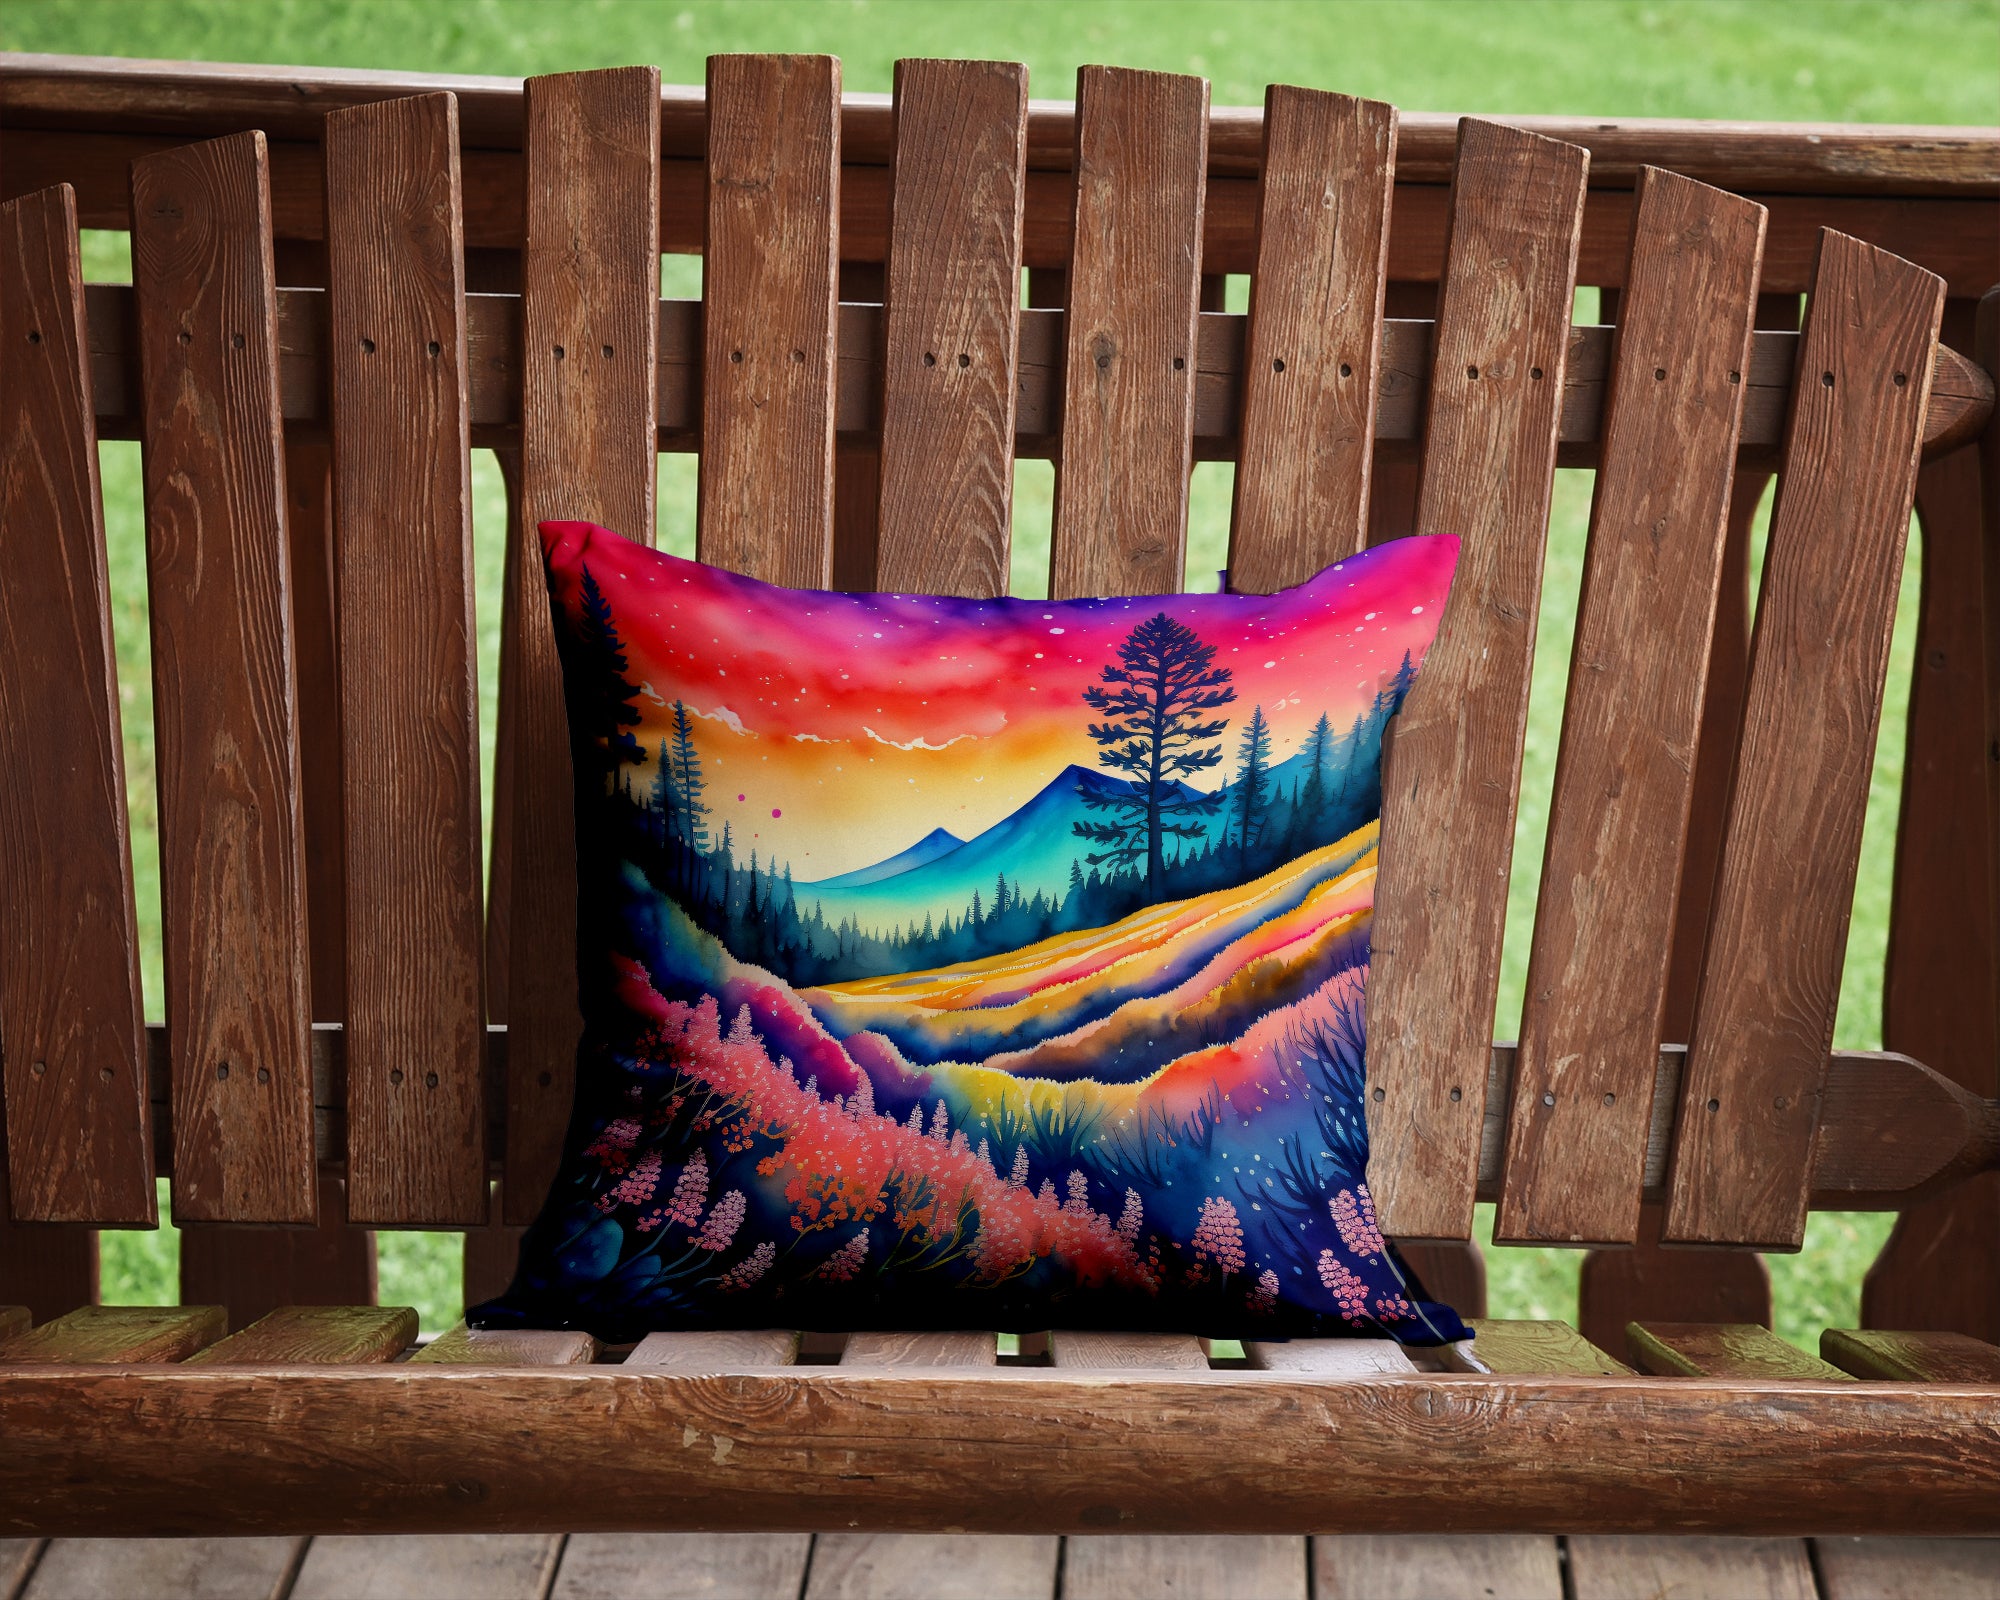 Buy this Colorful Yarrow Fabric Decorative Pillow